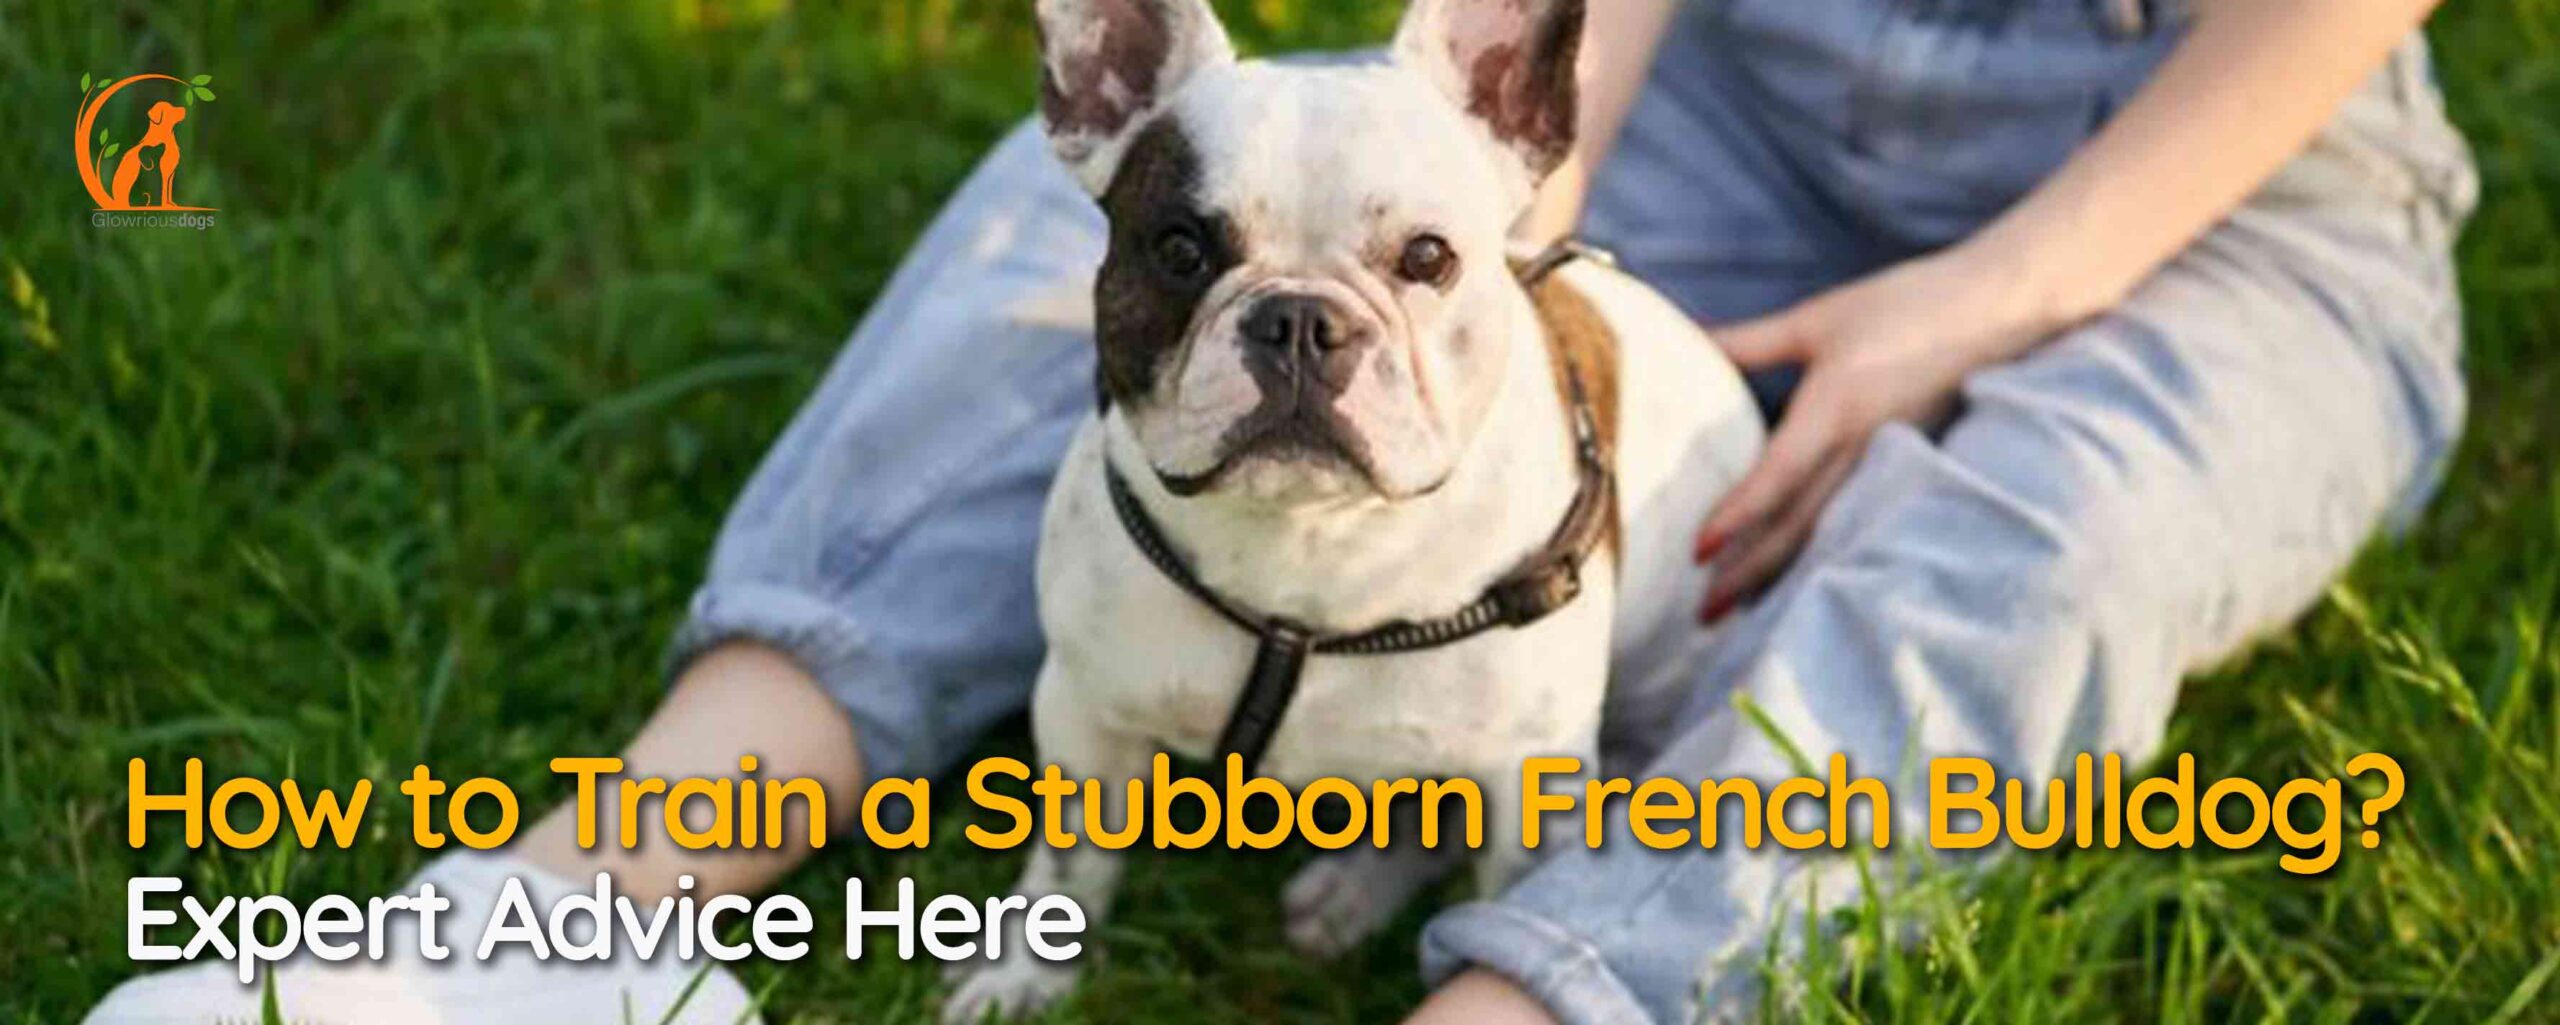 How to Train a Stubborn French Bulldog? Expert Advice Here